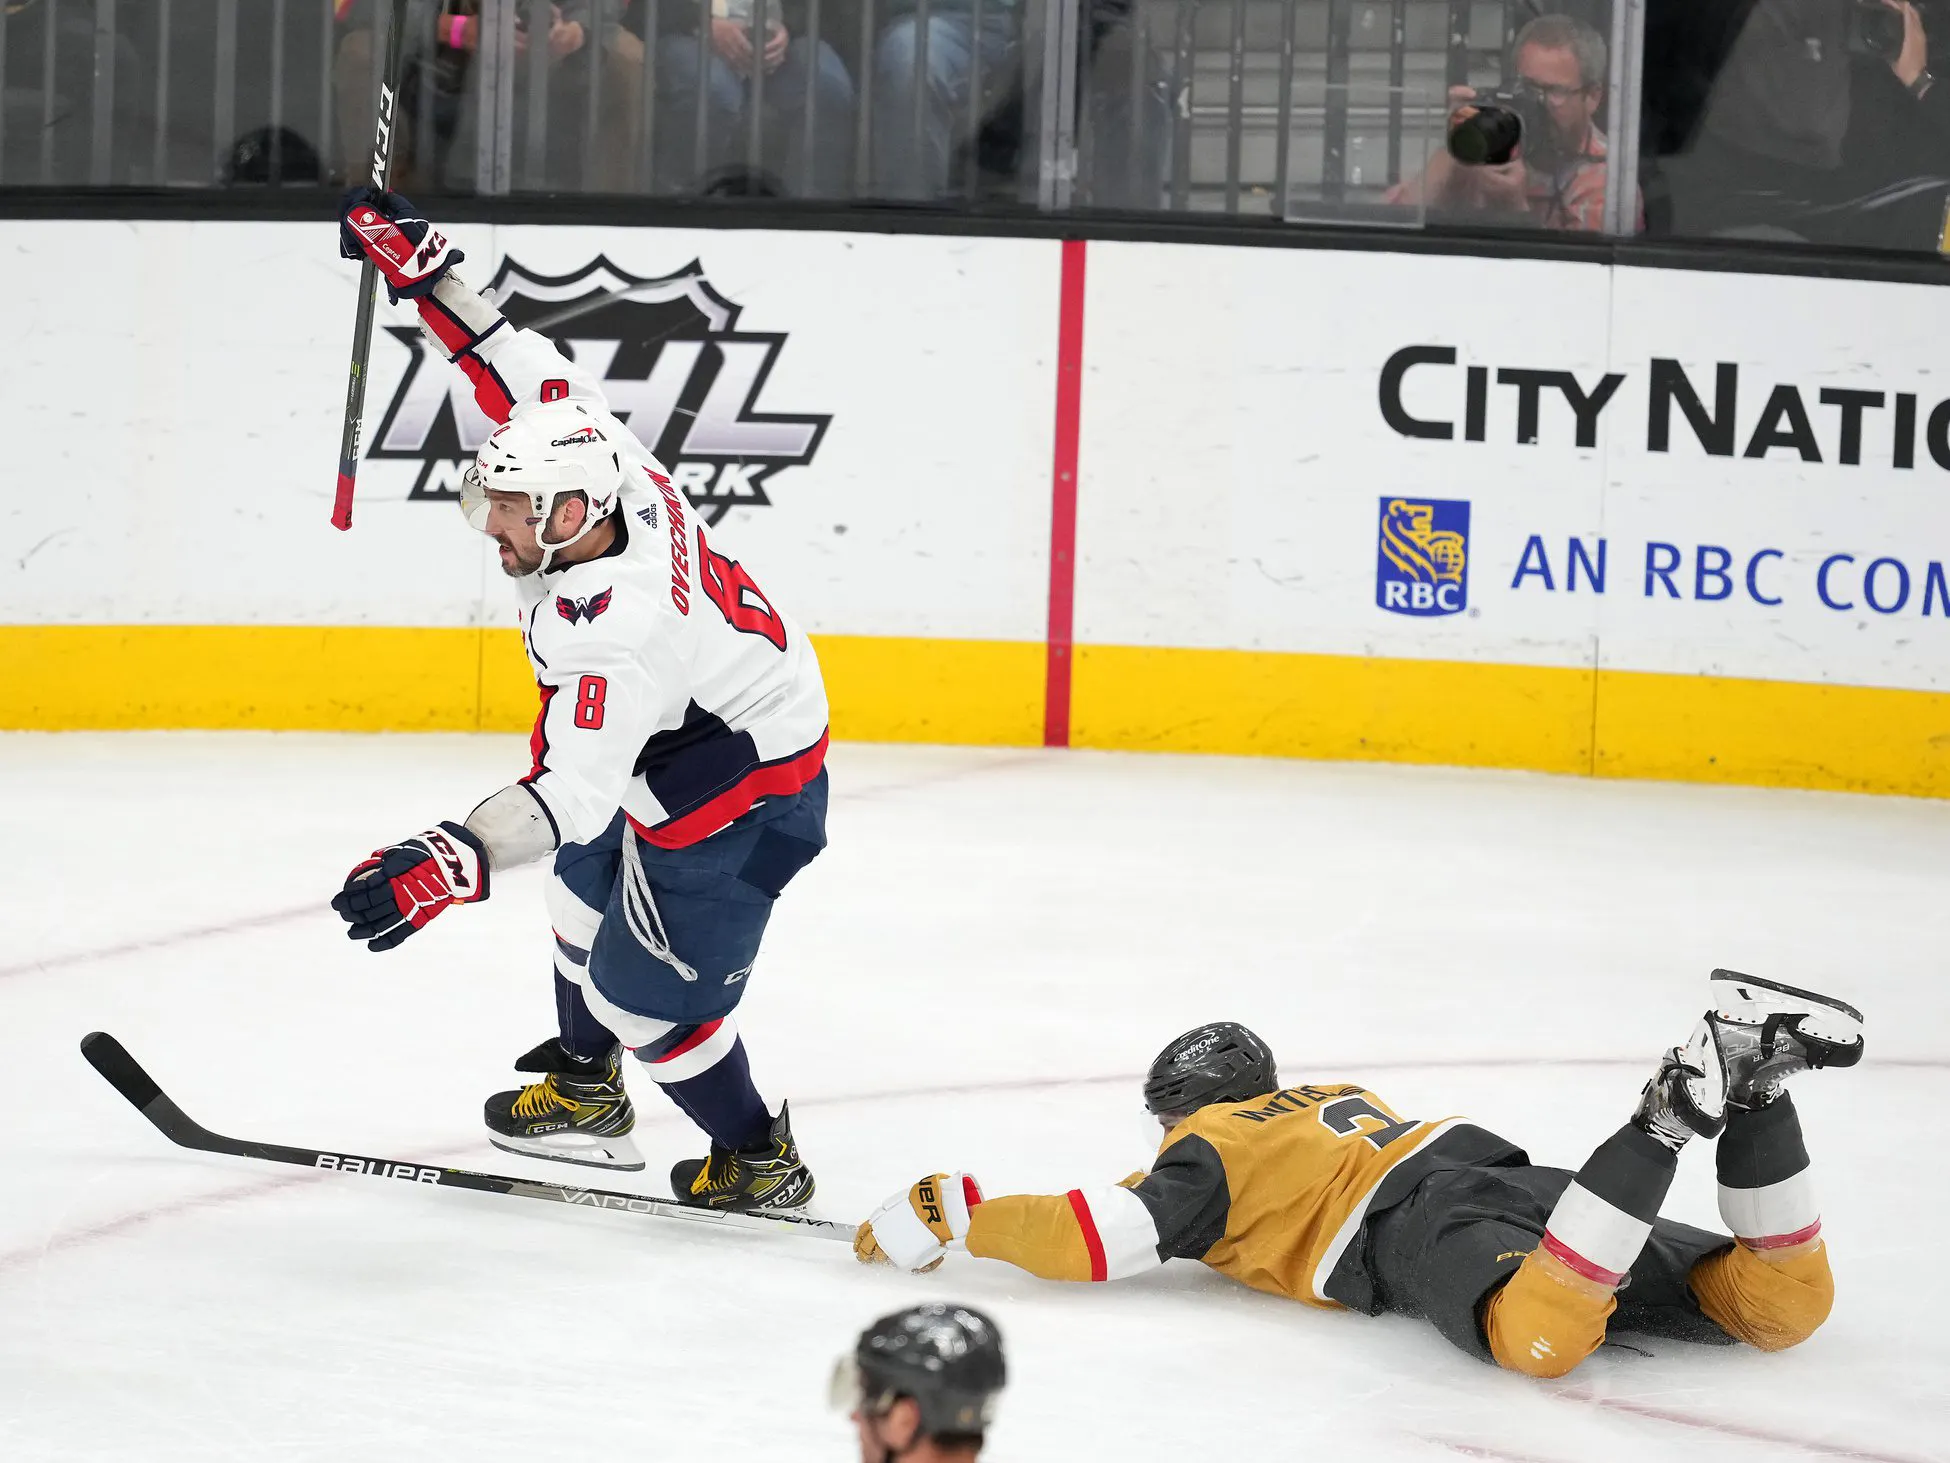 Alex Ovechkin ties NHL record with his ninth 50-goal season